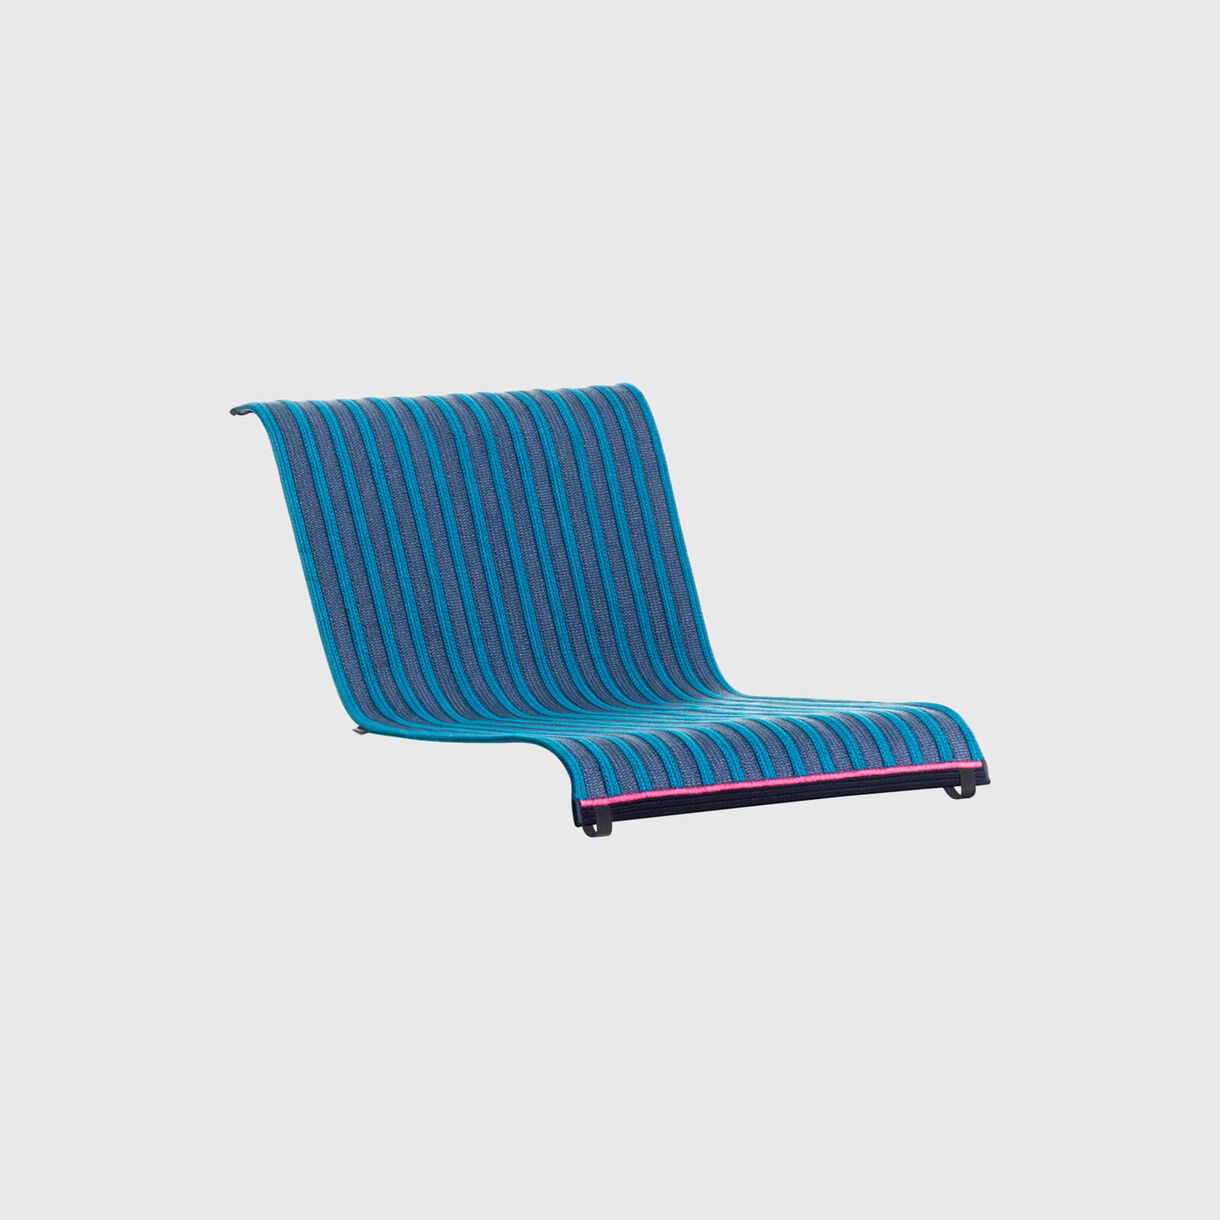 South Woven Seat Cover, Blue